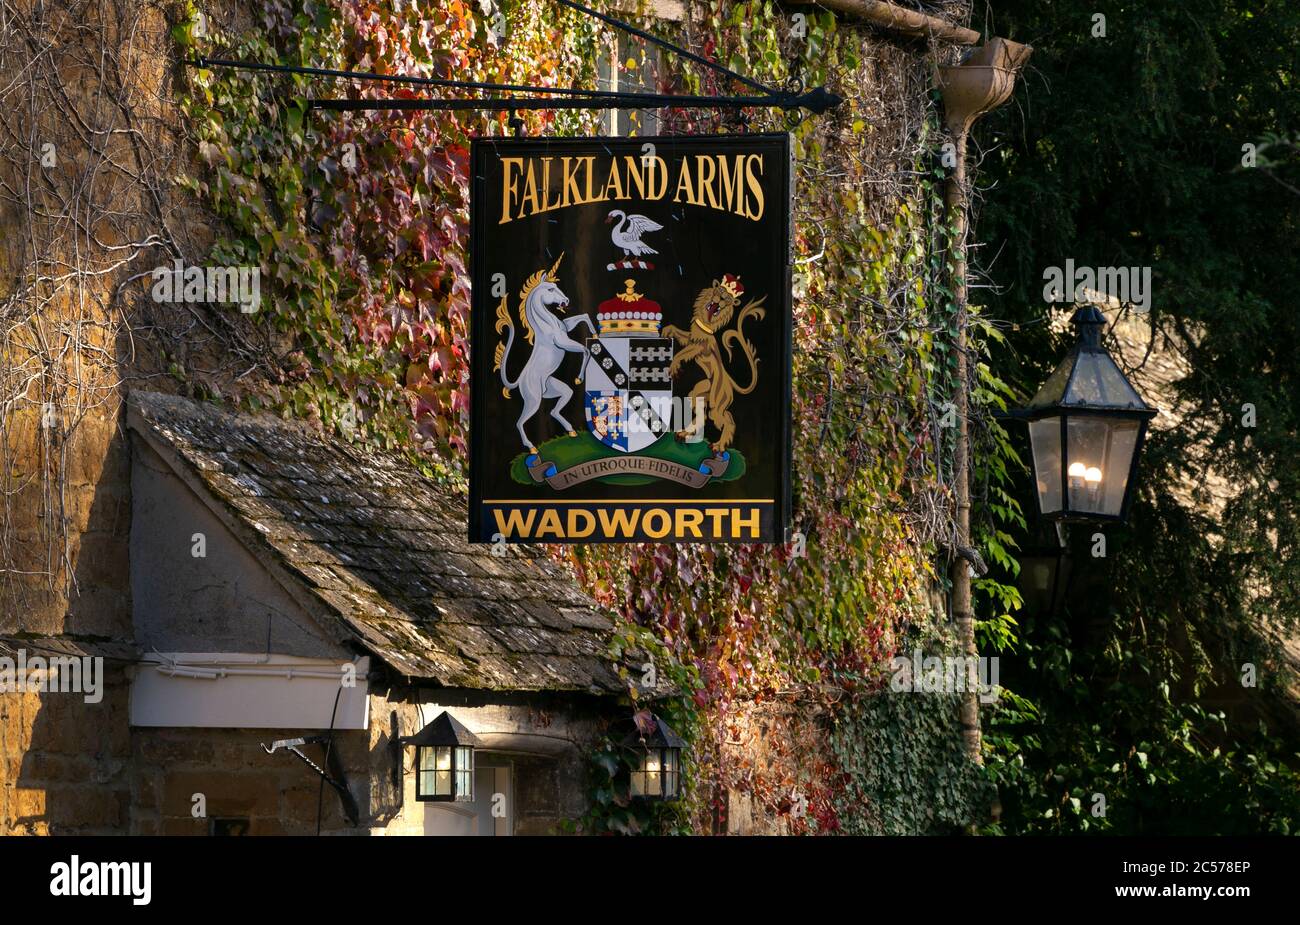 Falkland Arms pub in Great Tew, Oxfordshire Foto Stock